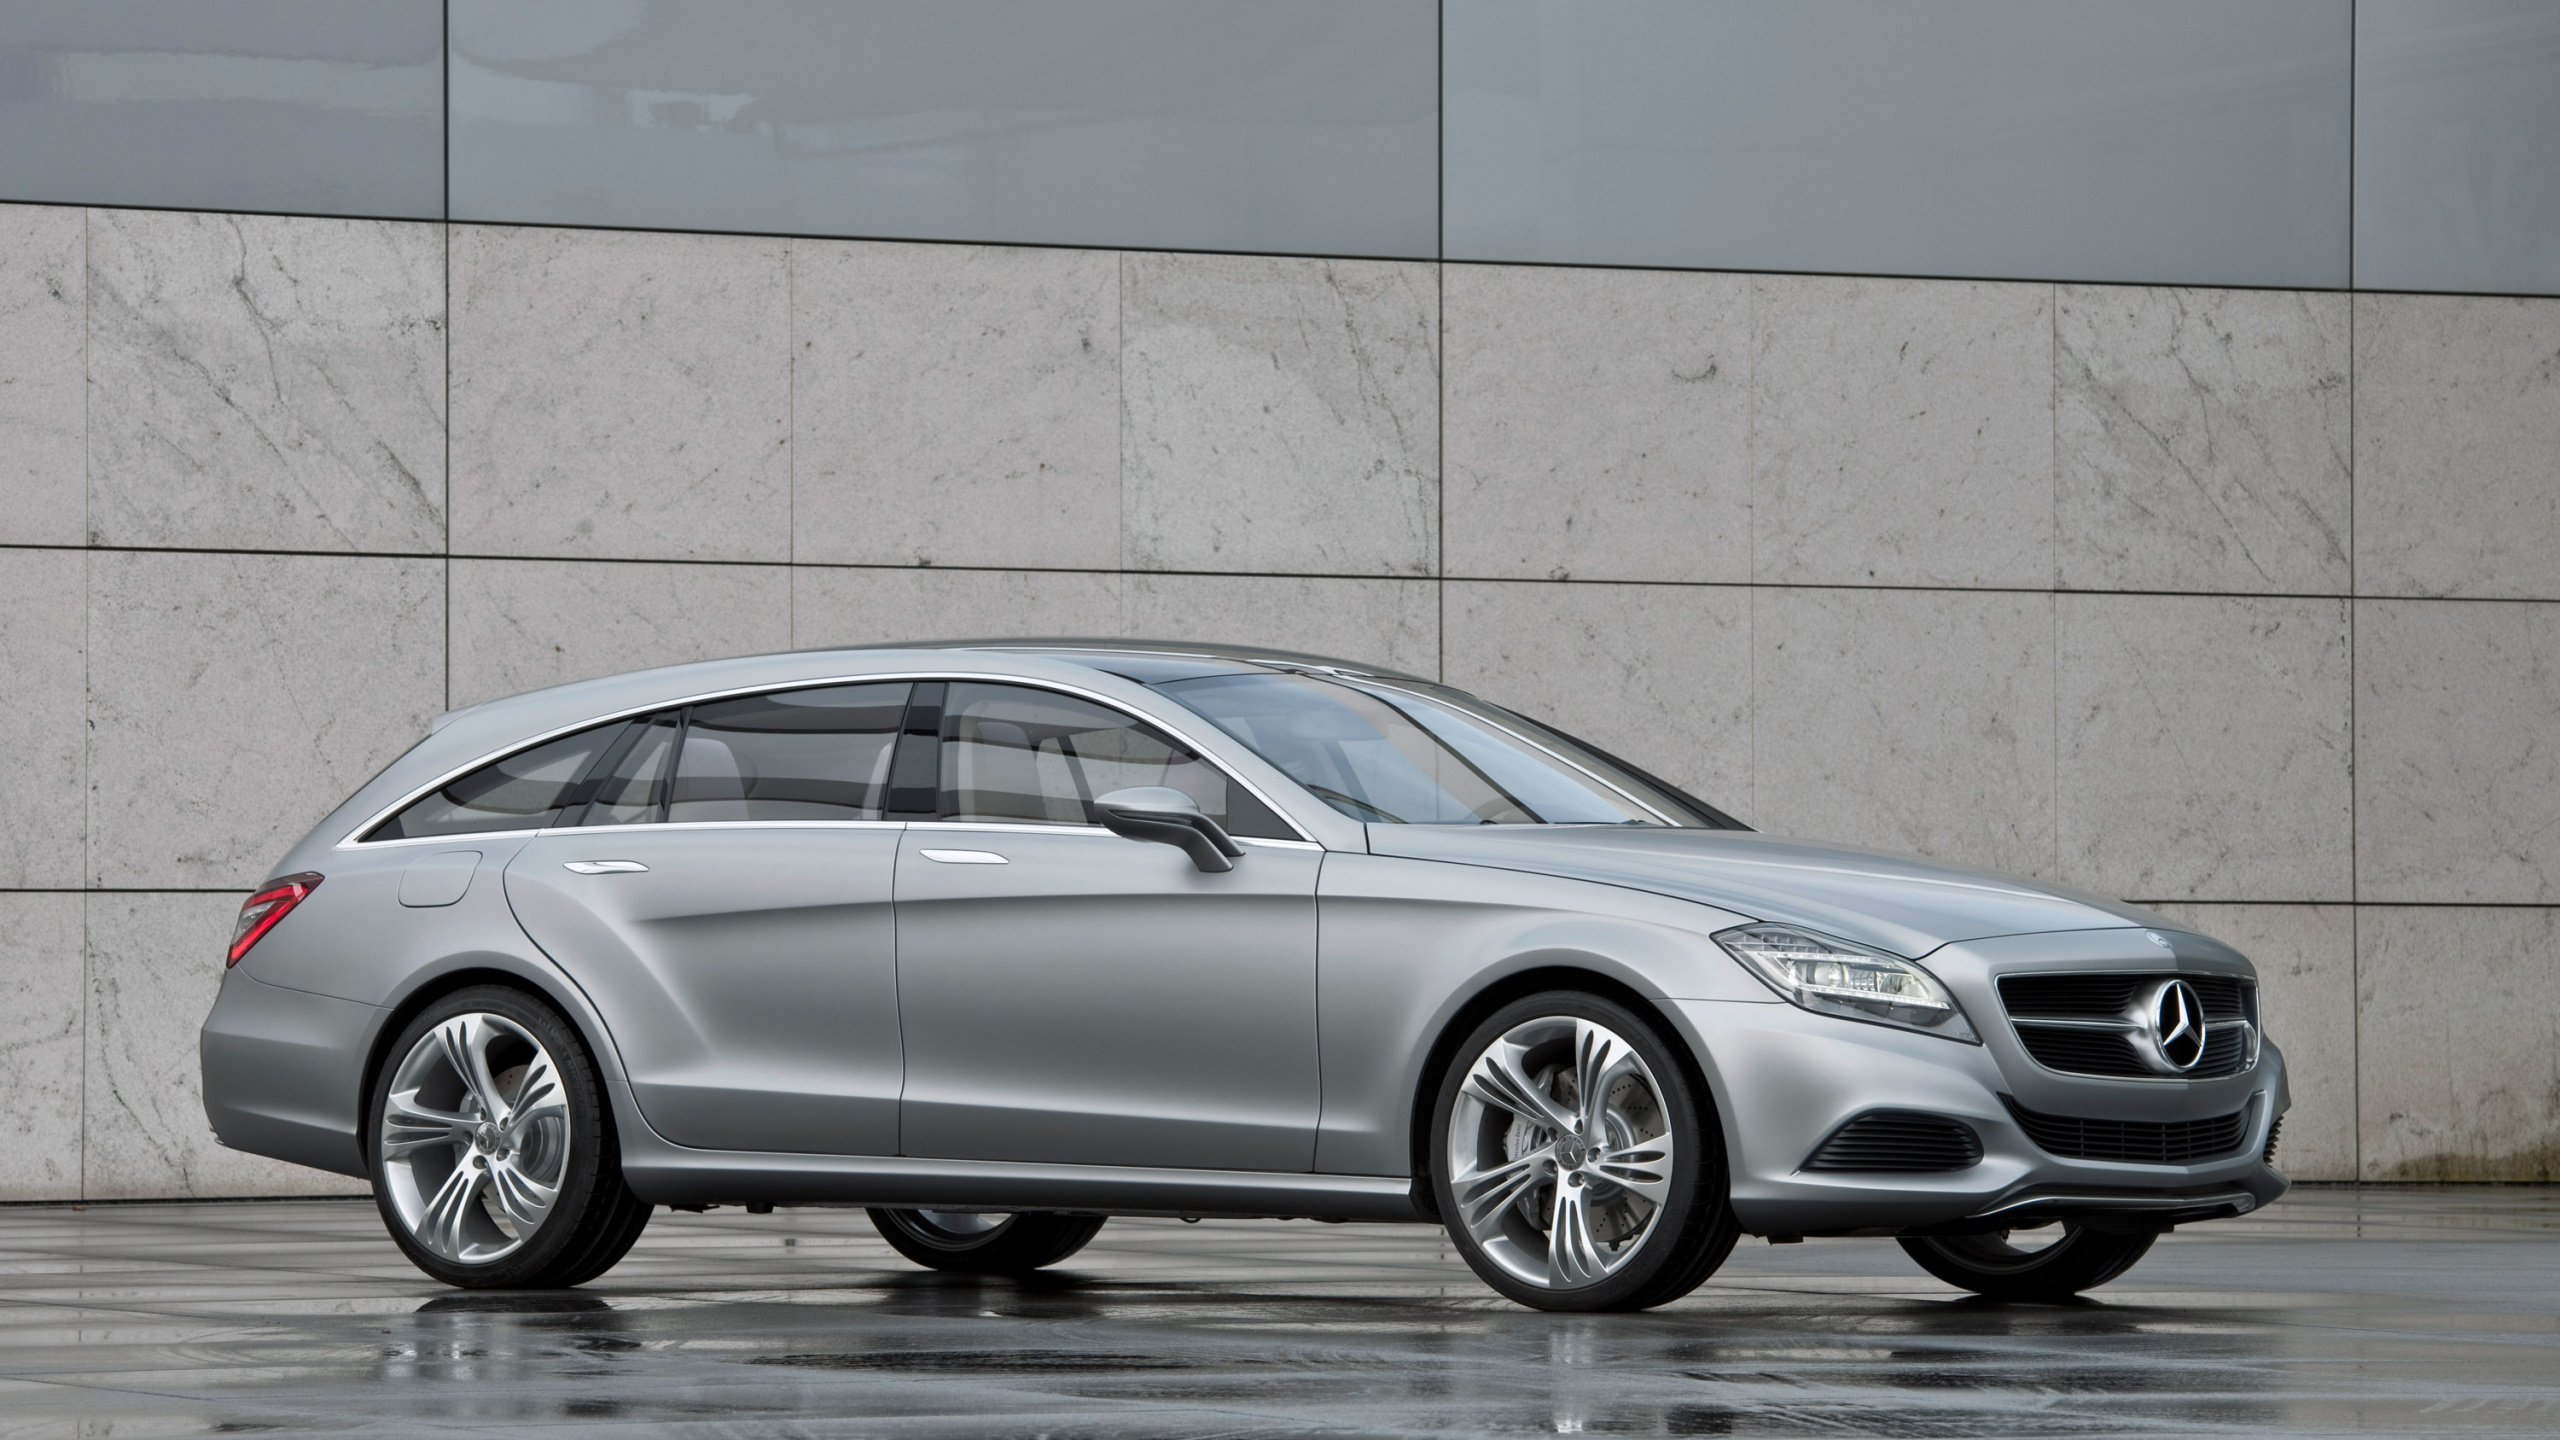 Silver Mercedes Benz Coupe Parked Beside Brown Wall. Wallpaper in 2560x1440 Resolution